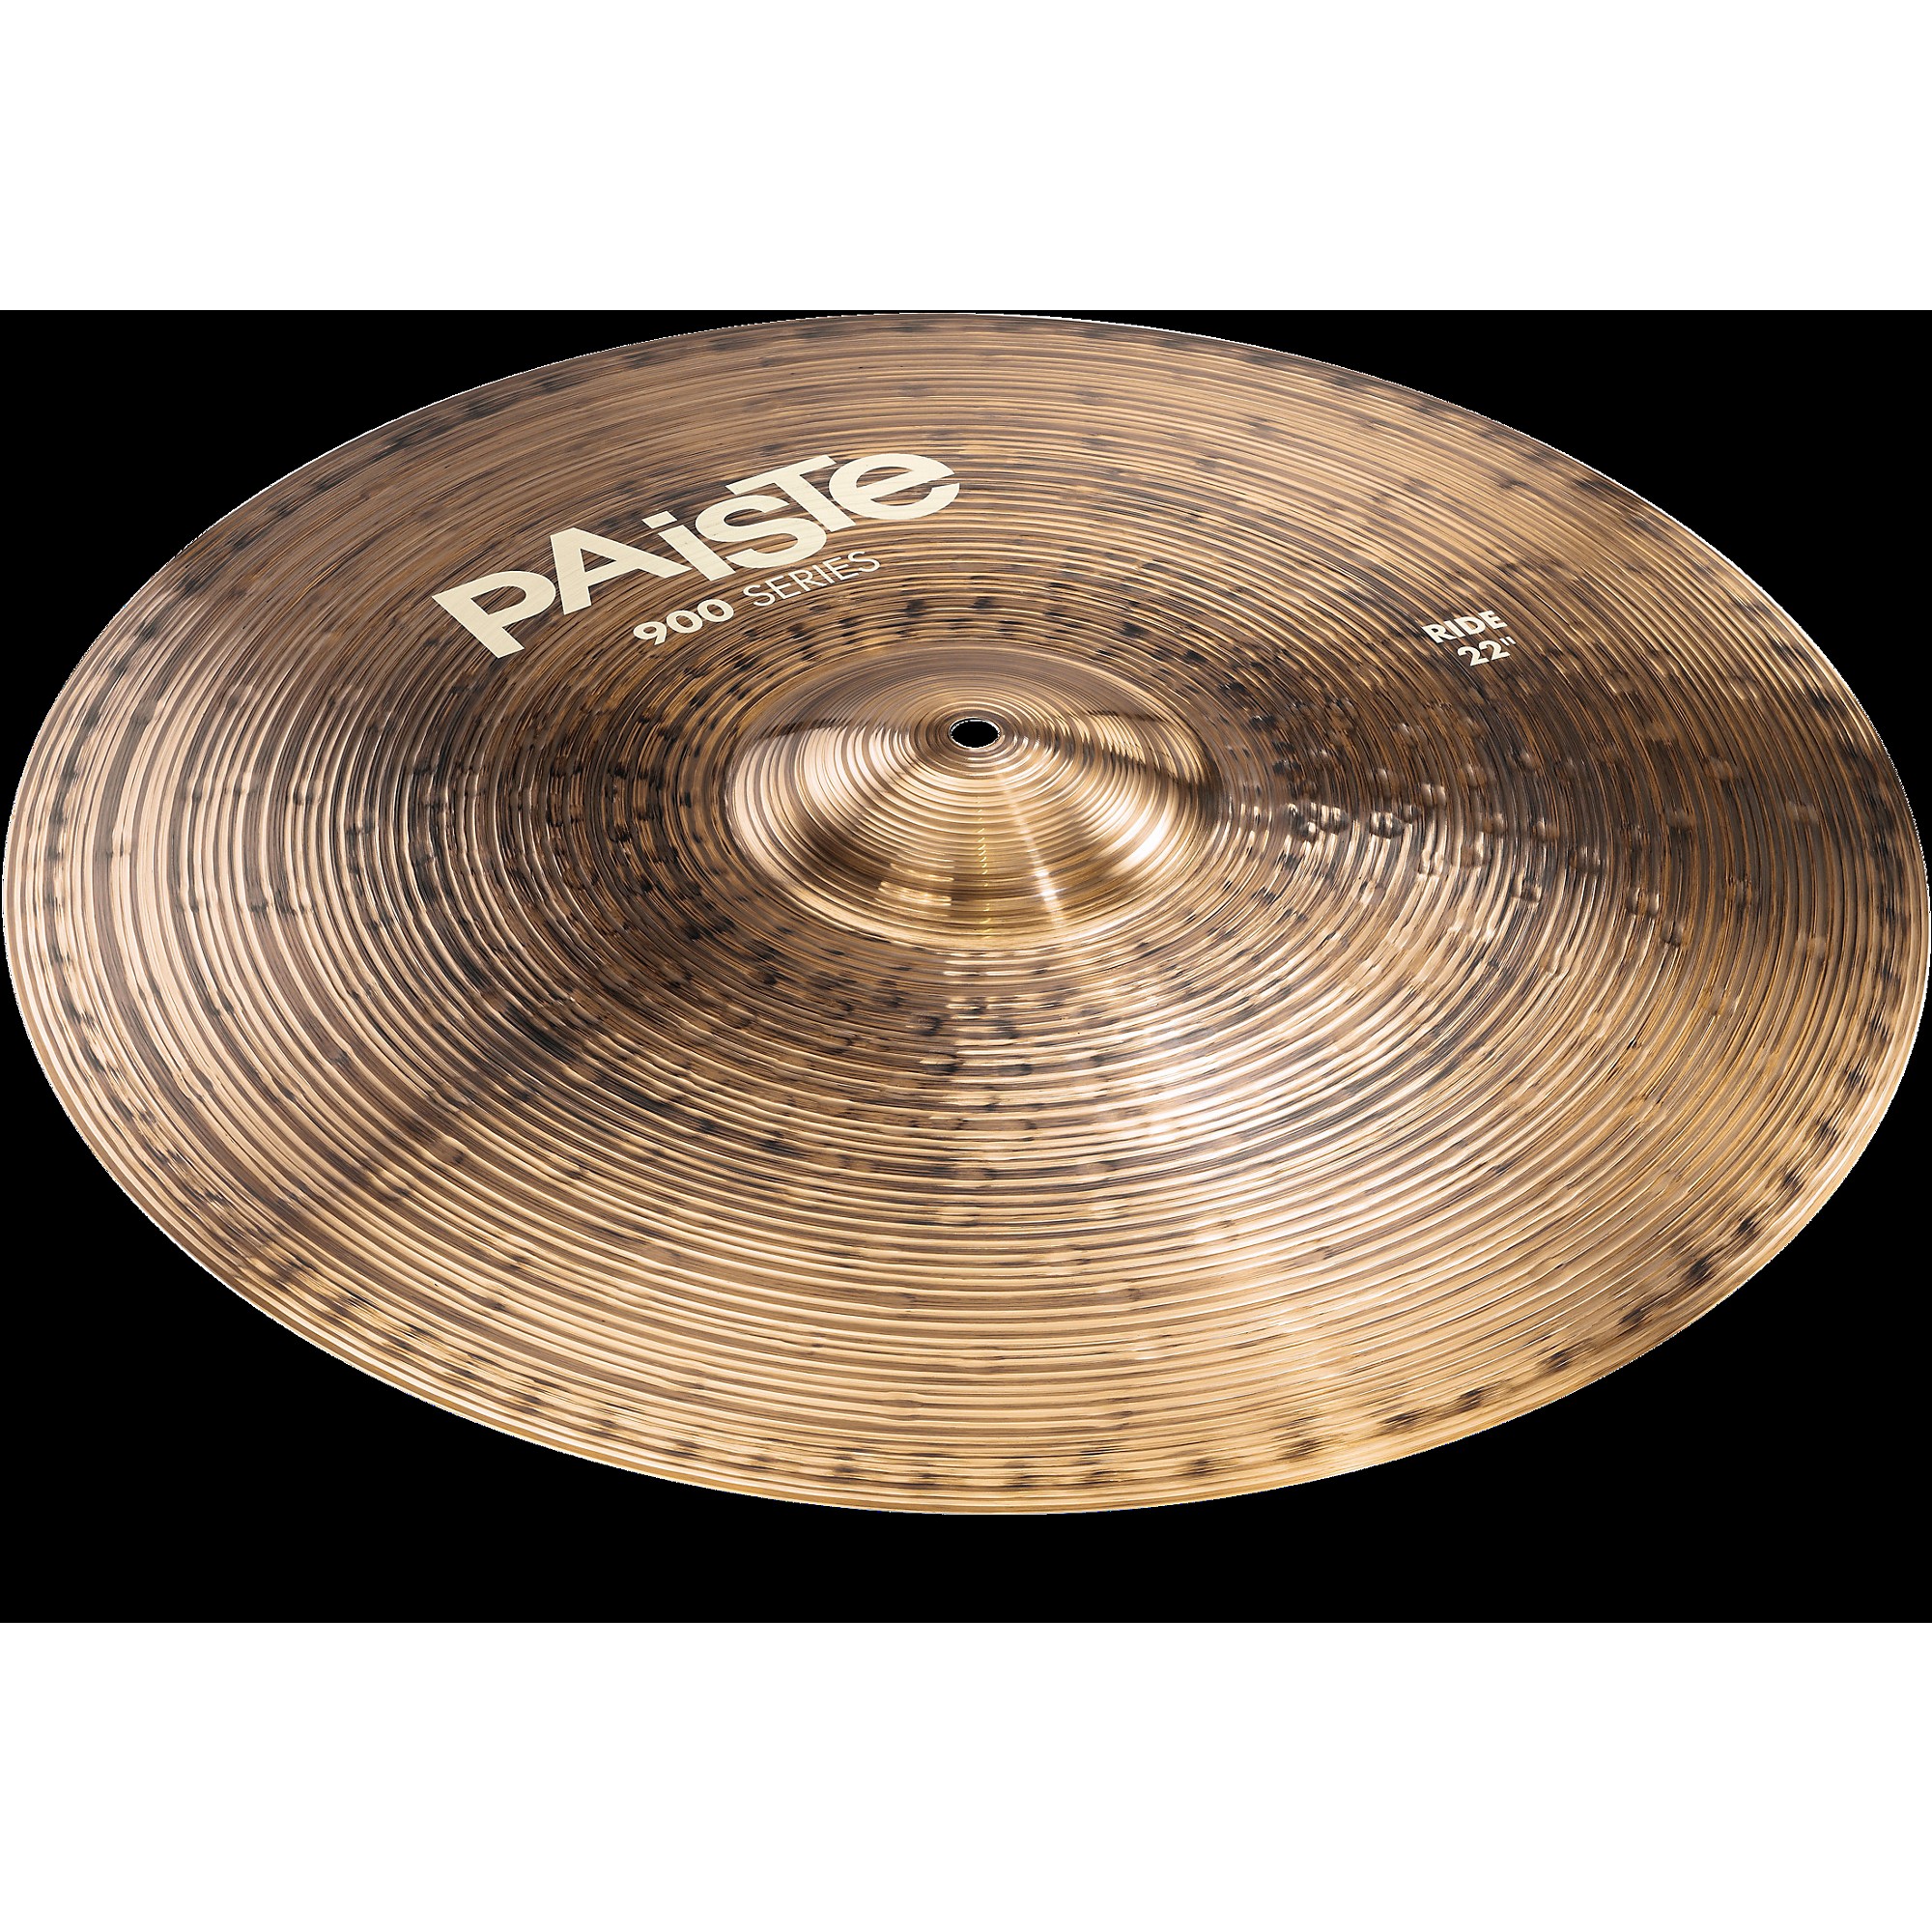 Paiste 900 Series Ride Cymbal 22 in. | Guitar Center